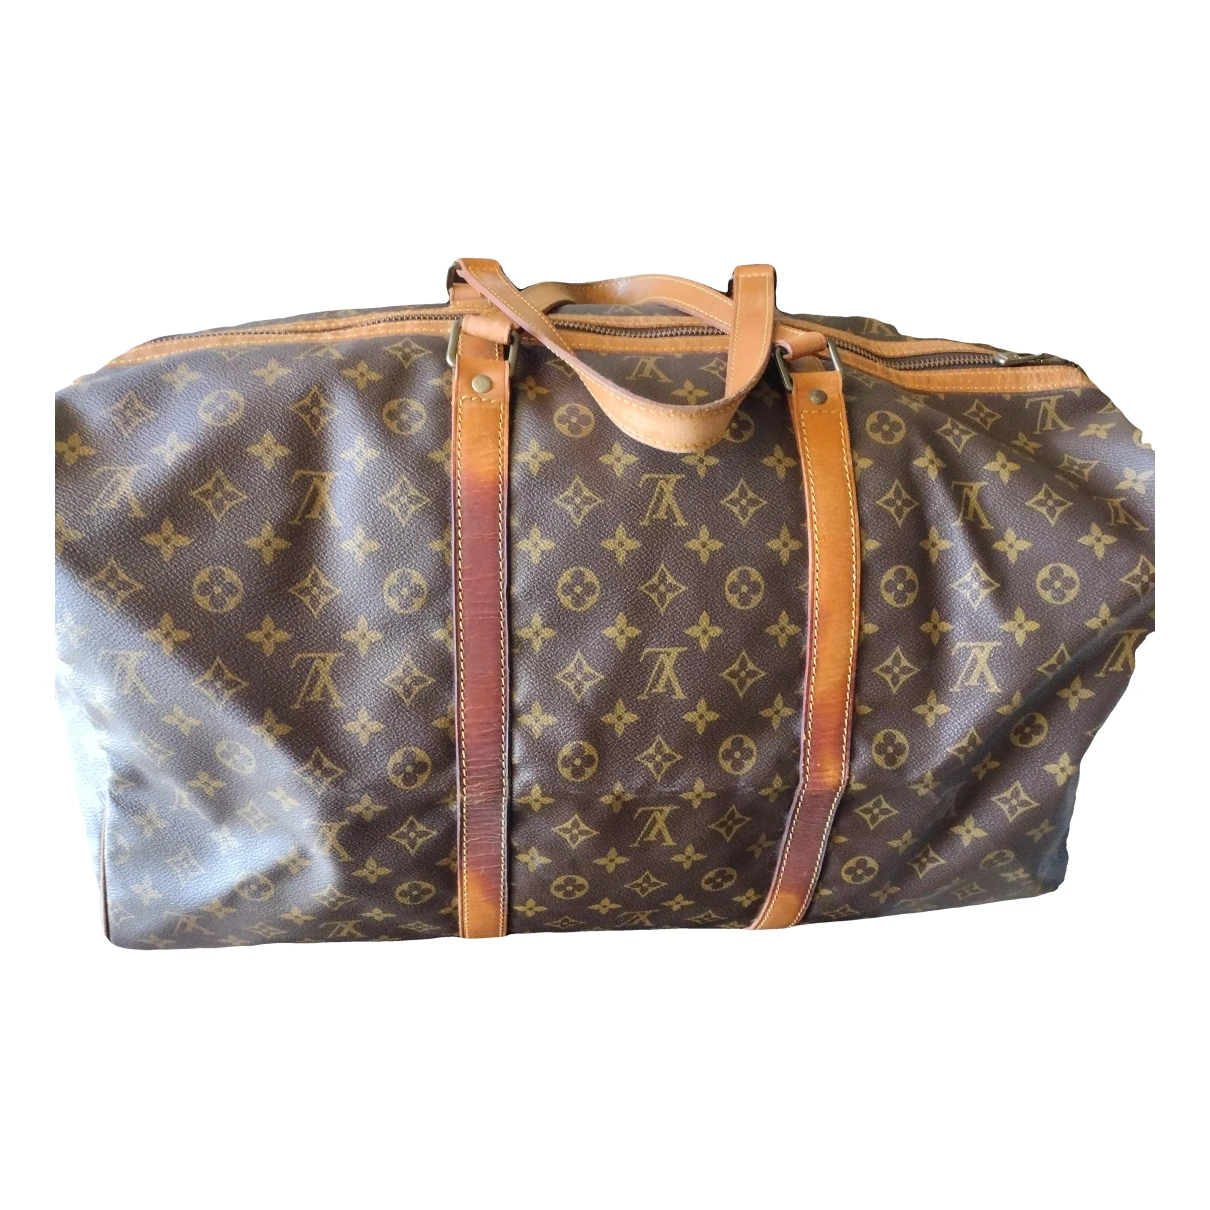 Pre-owned Louis Vuitton Sac Souple Leather Travel Bag In Brown